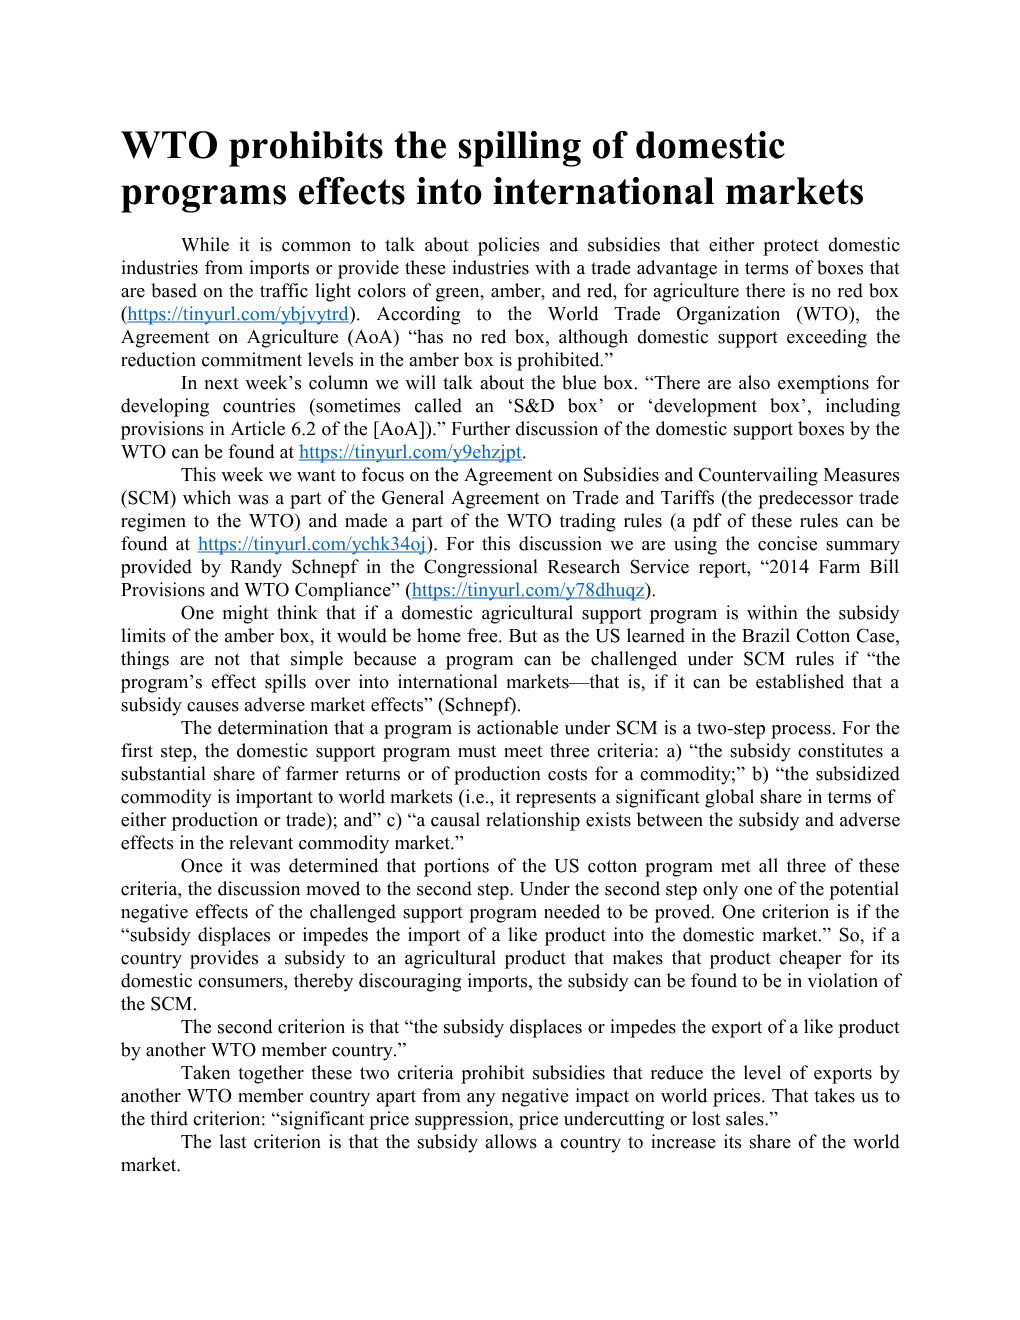 WTO Prohibits the Spilling of Domestic Programs Effects Into International Markets